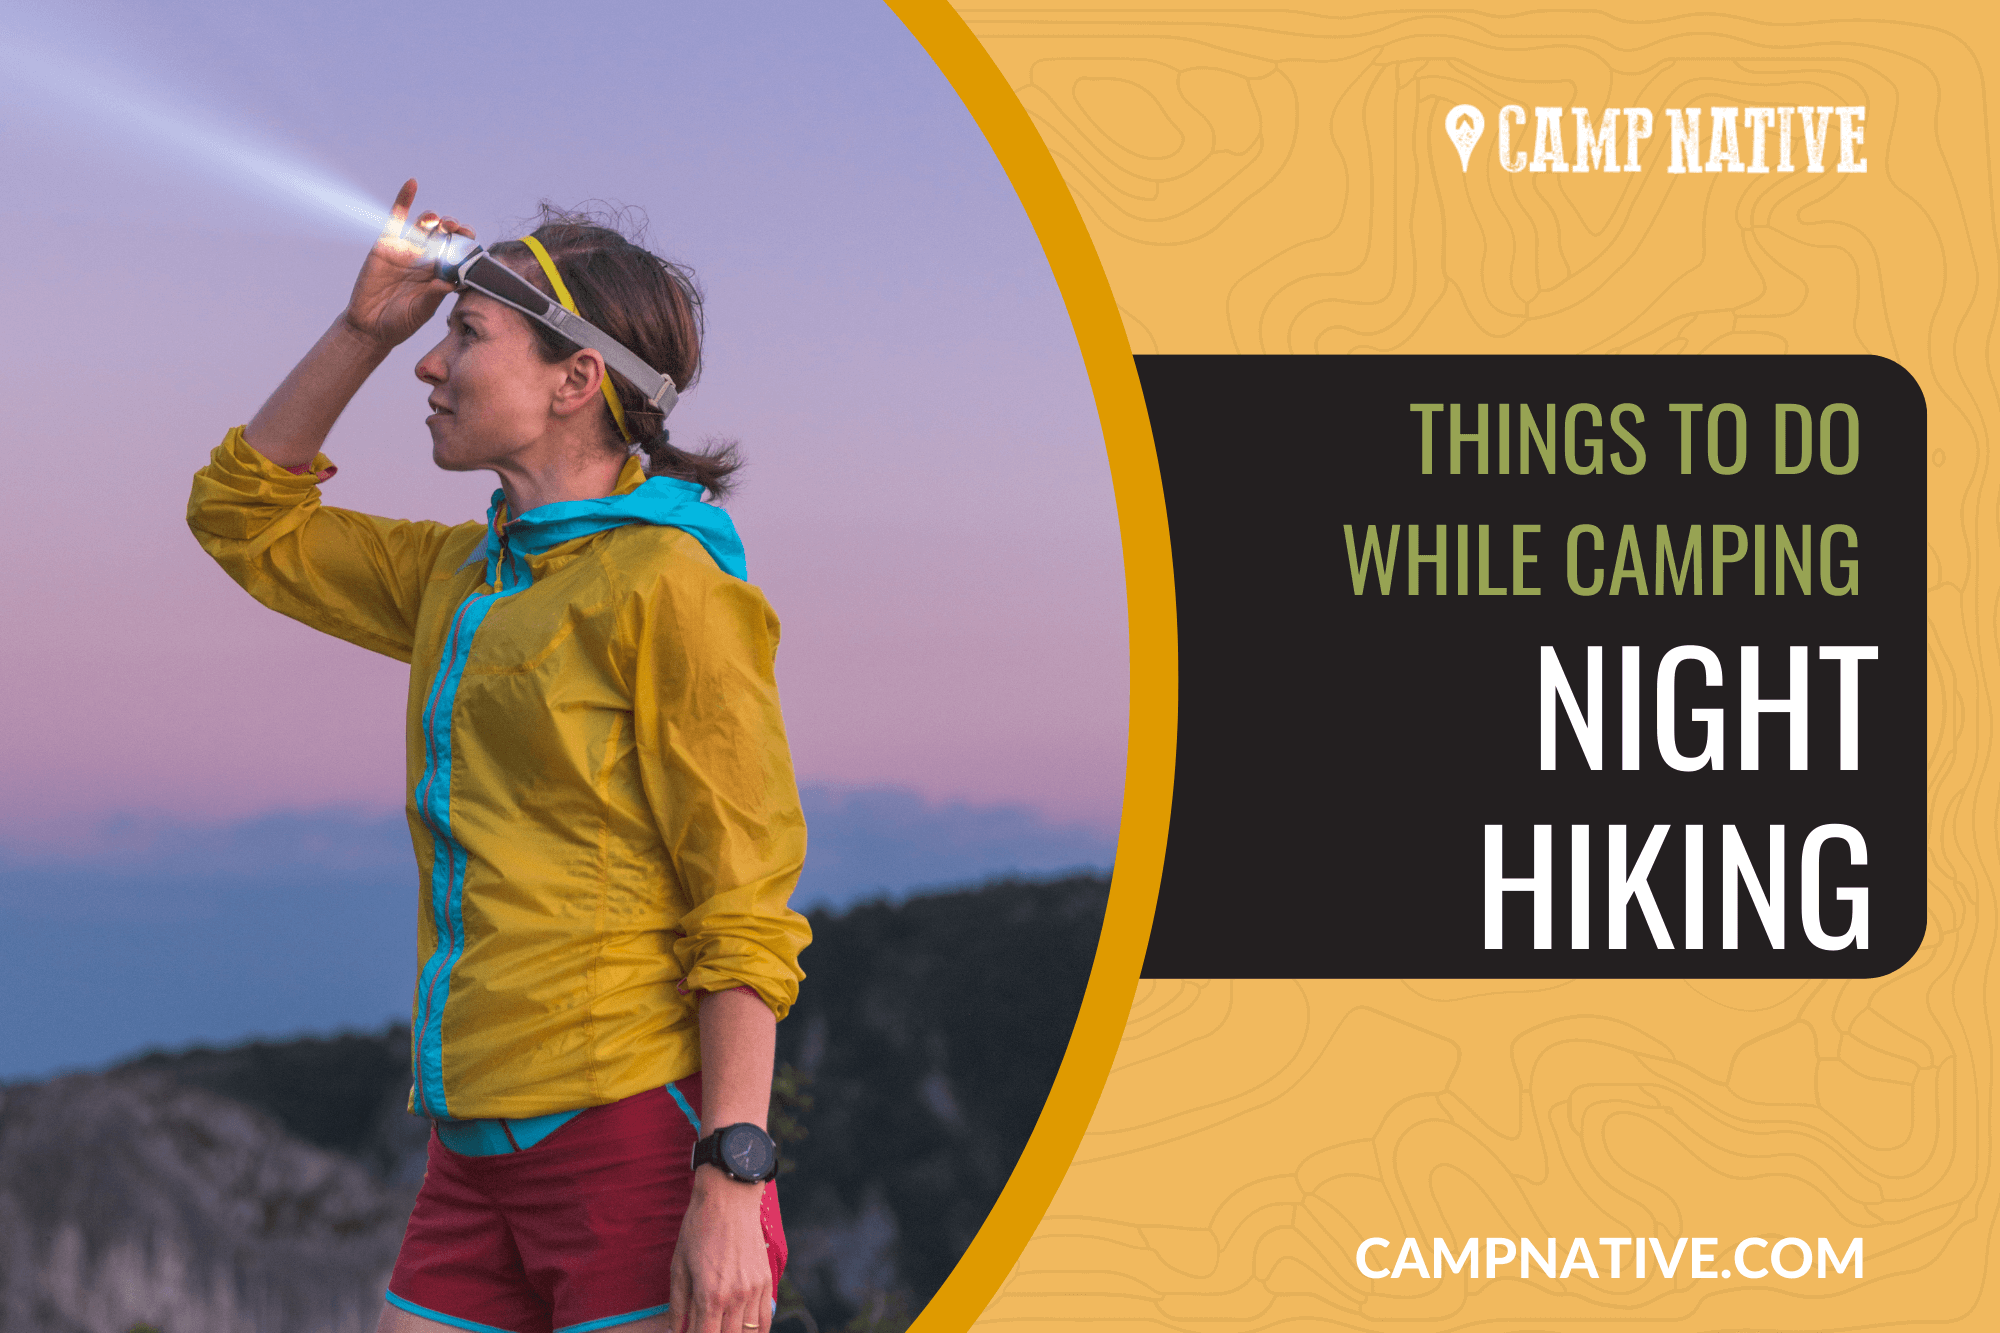 THINGS TO DO WHILE CAMPING NIGHT HIKING